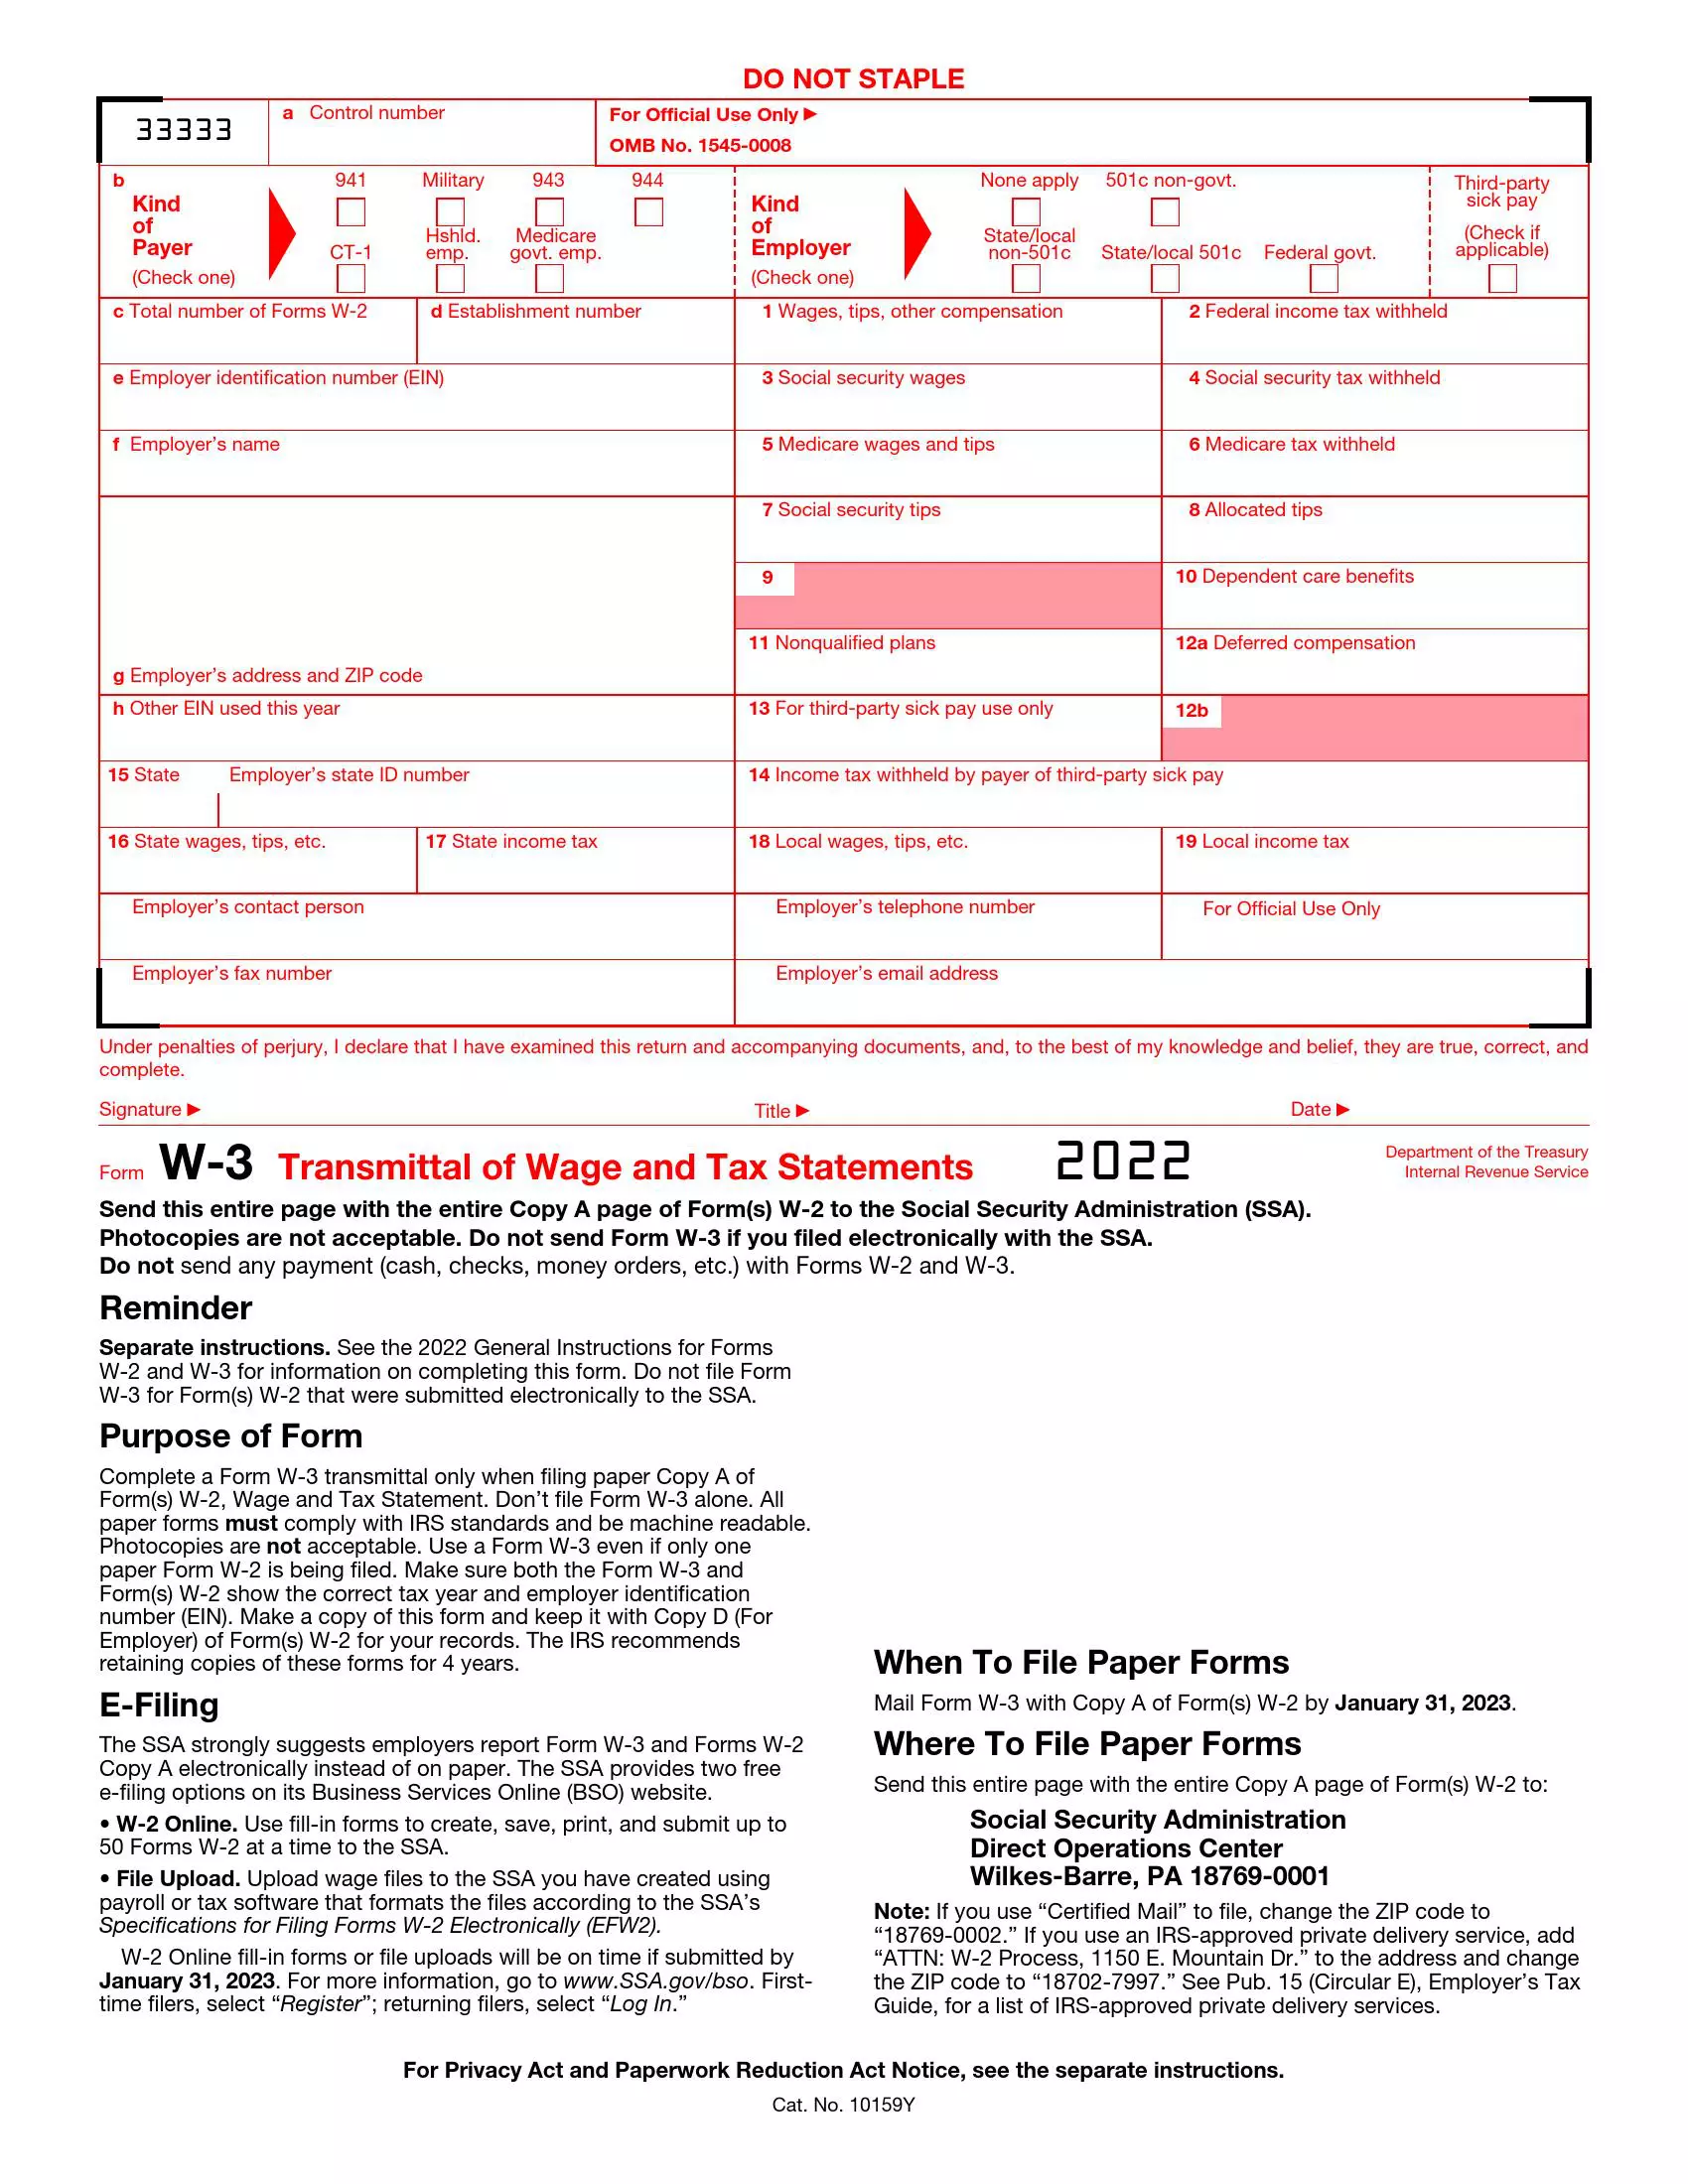 irs form w 3 2022 preview